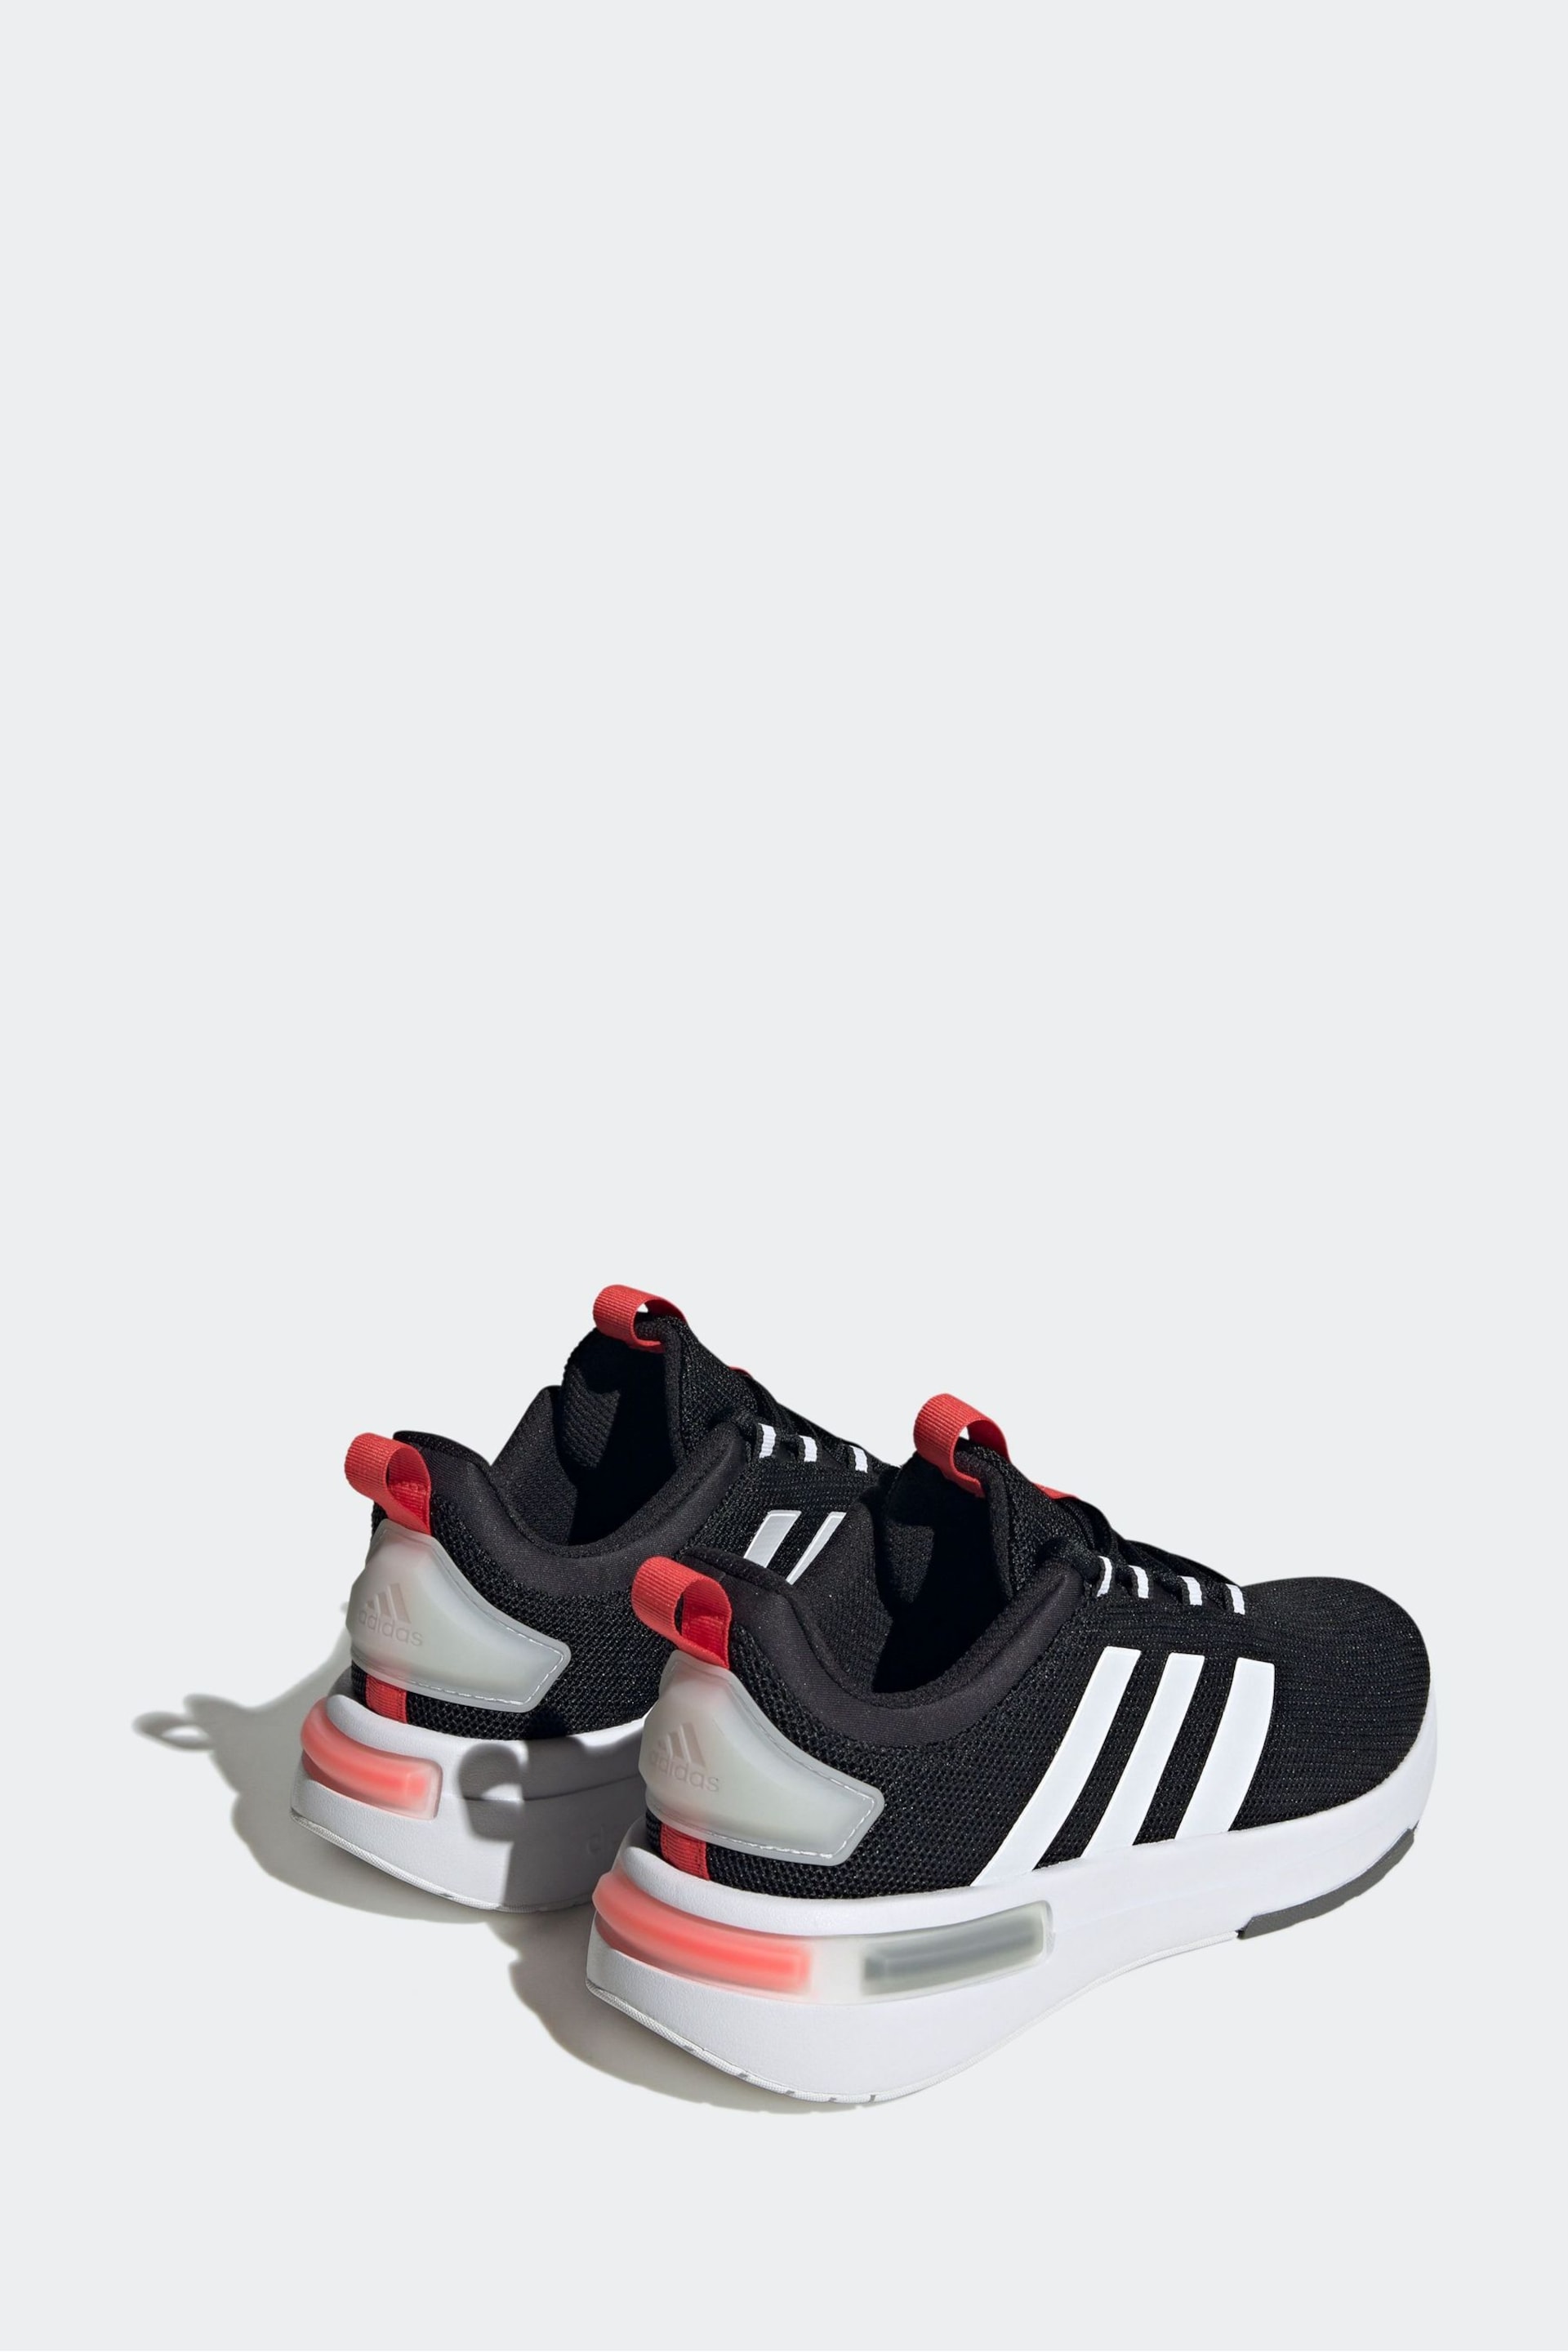 adidas Black Racer TR23 Trainers - Image 5 of 11